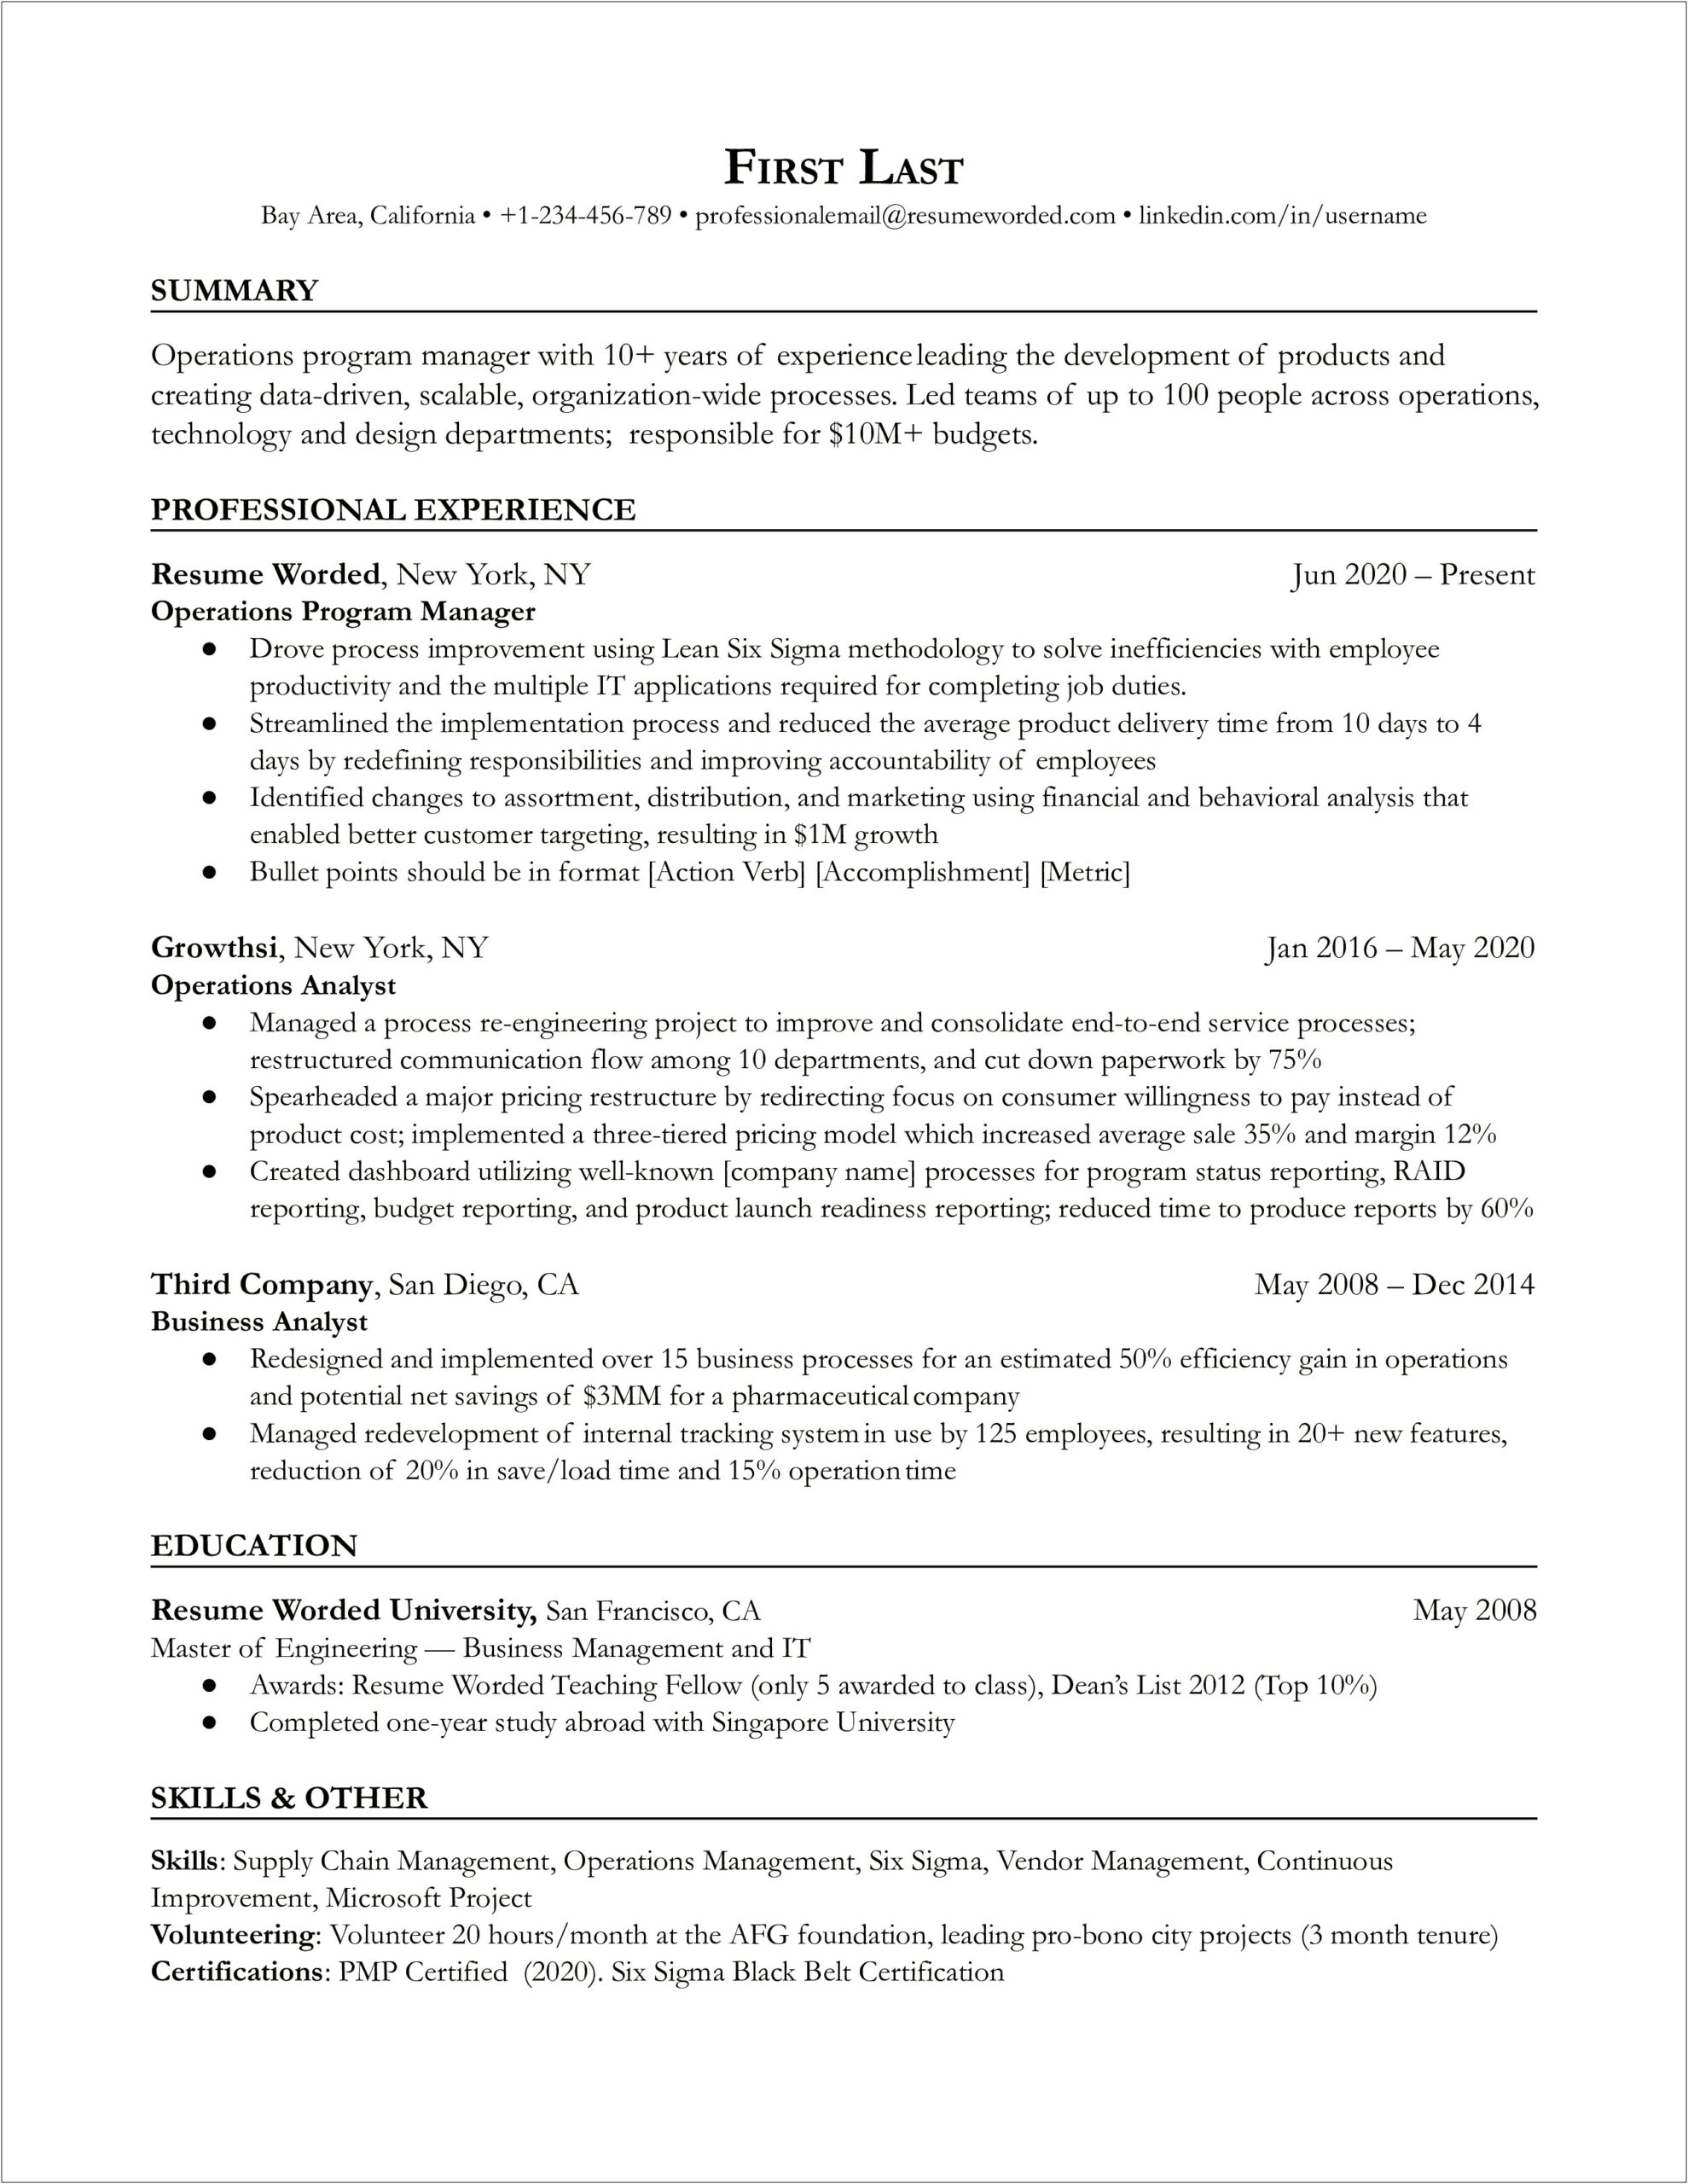 Operations Manger Resume With 20 Yrs Experience